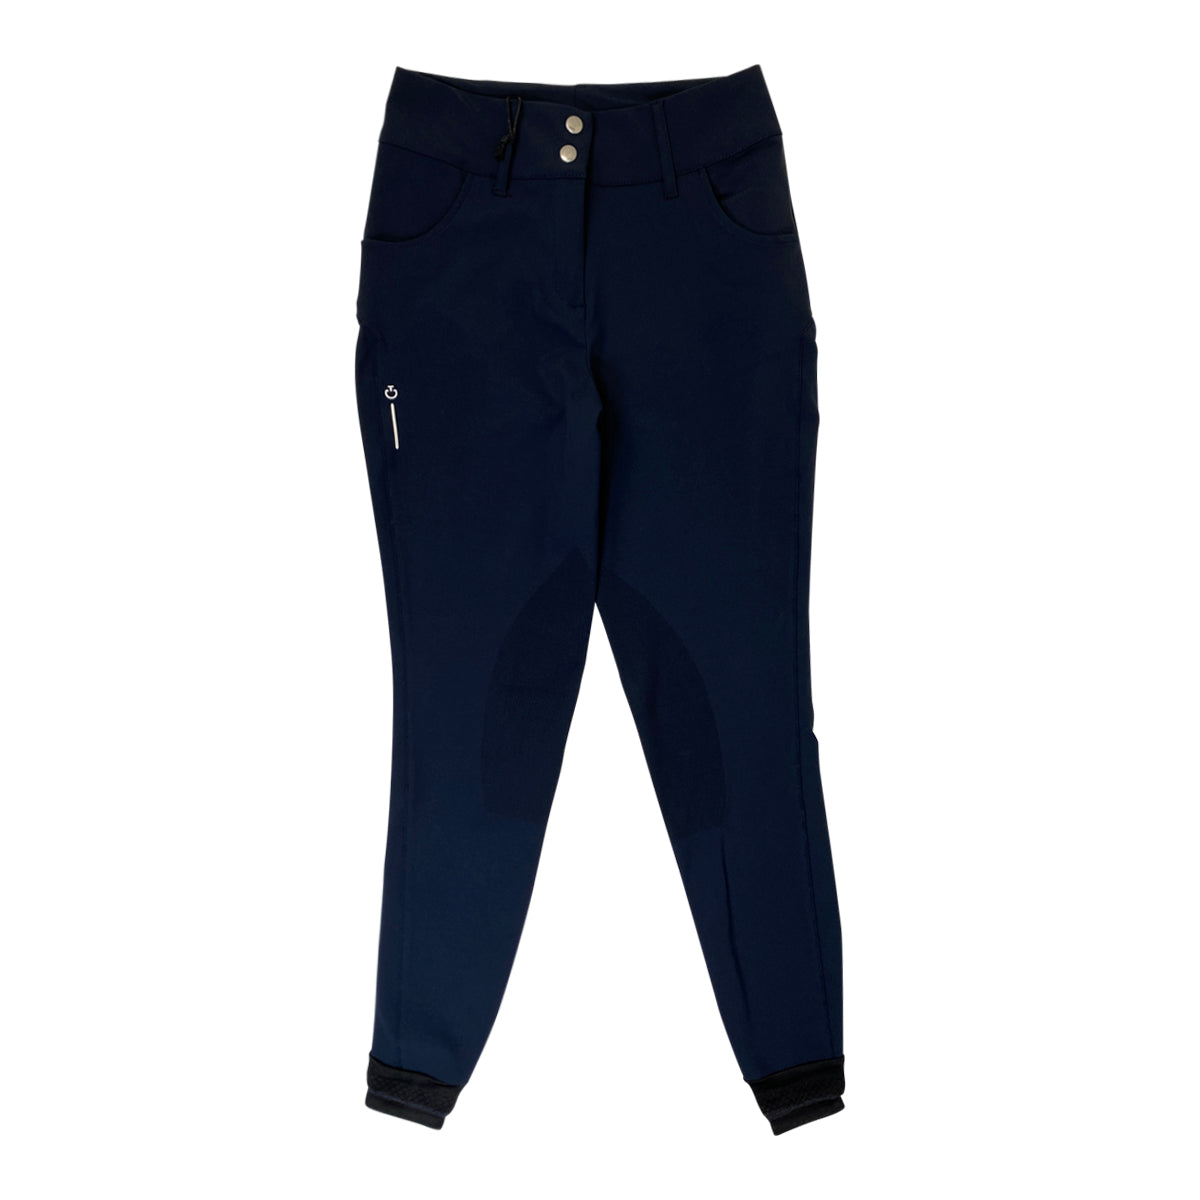 Cavalleria Toscana RS High Waist Knee Patch Breeches in Navy